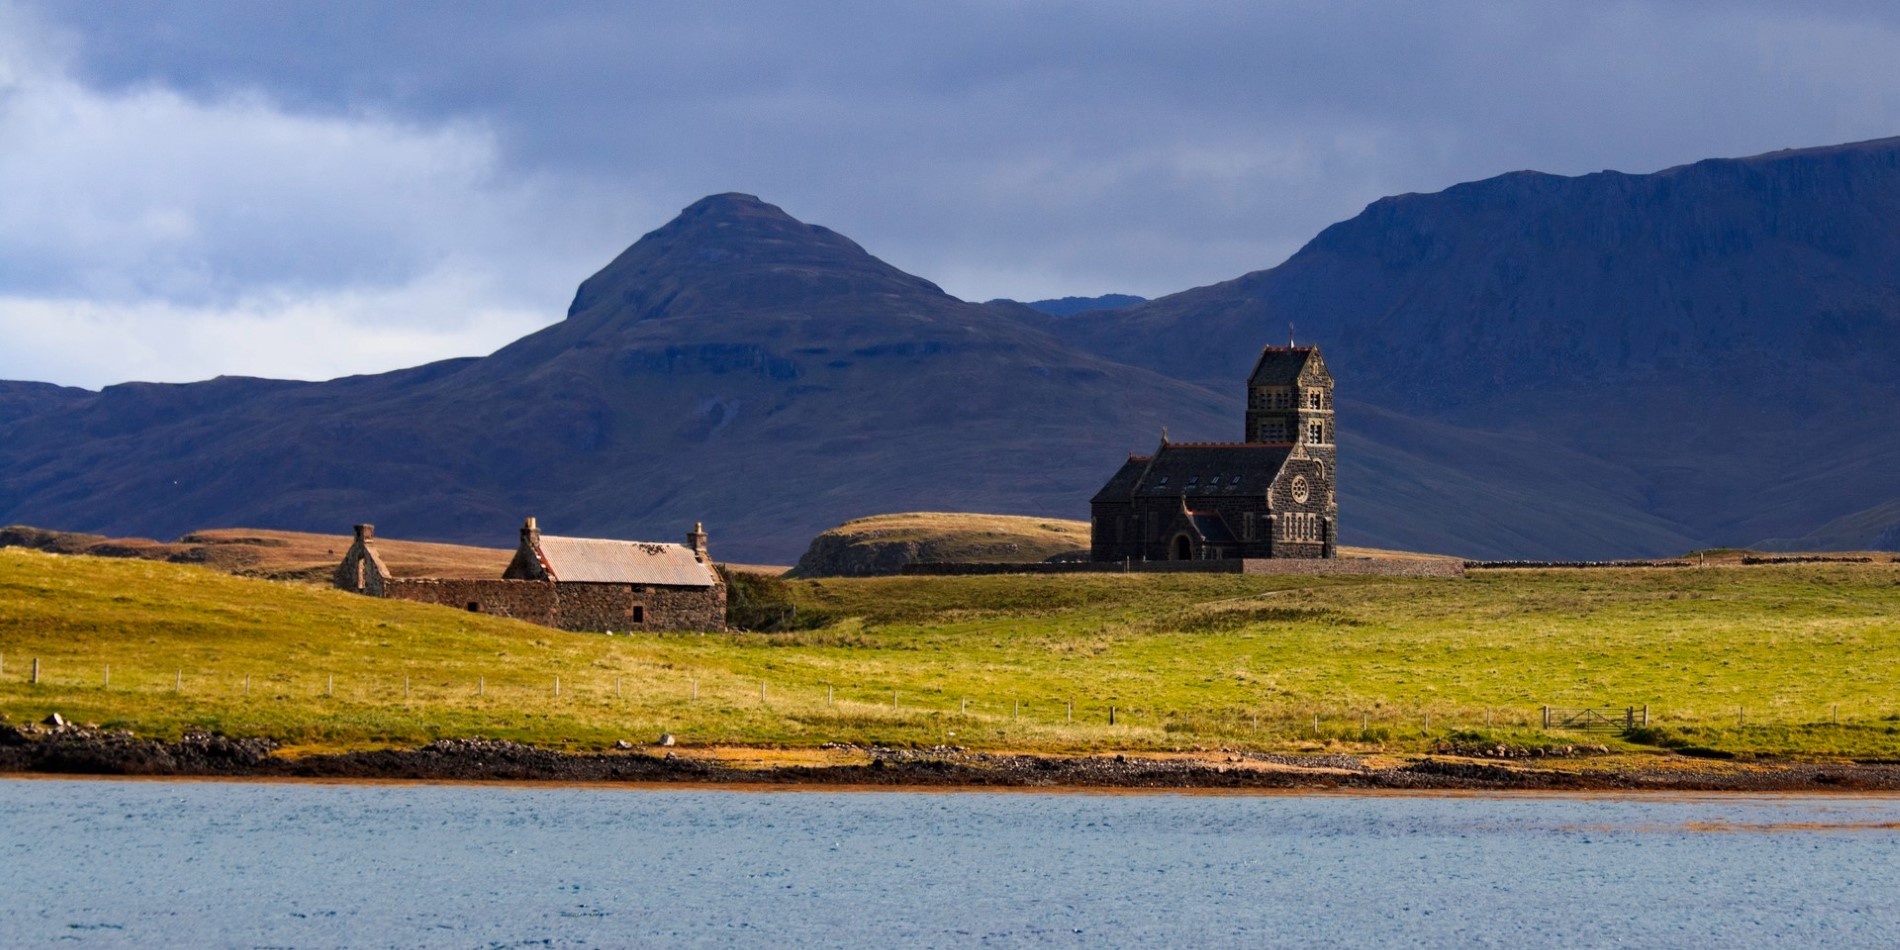 Old church on the isle of Canna